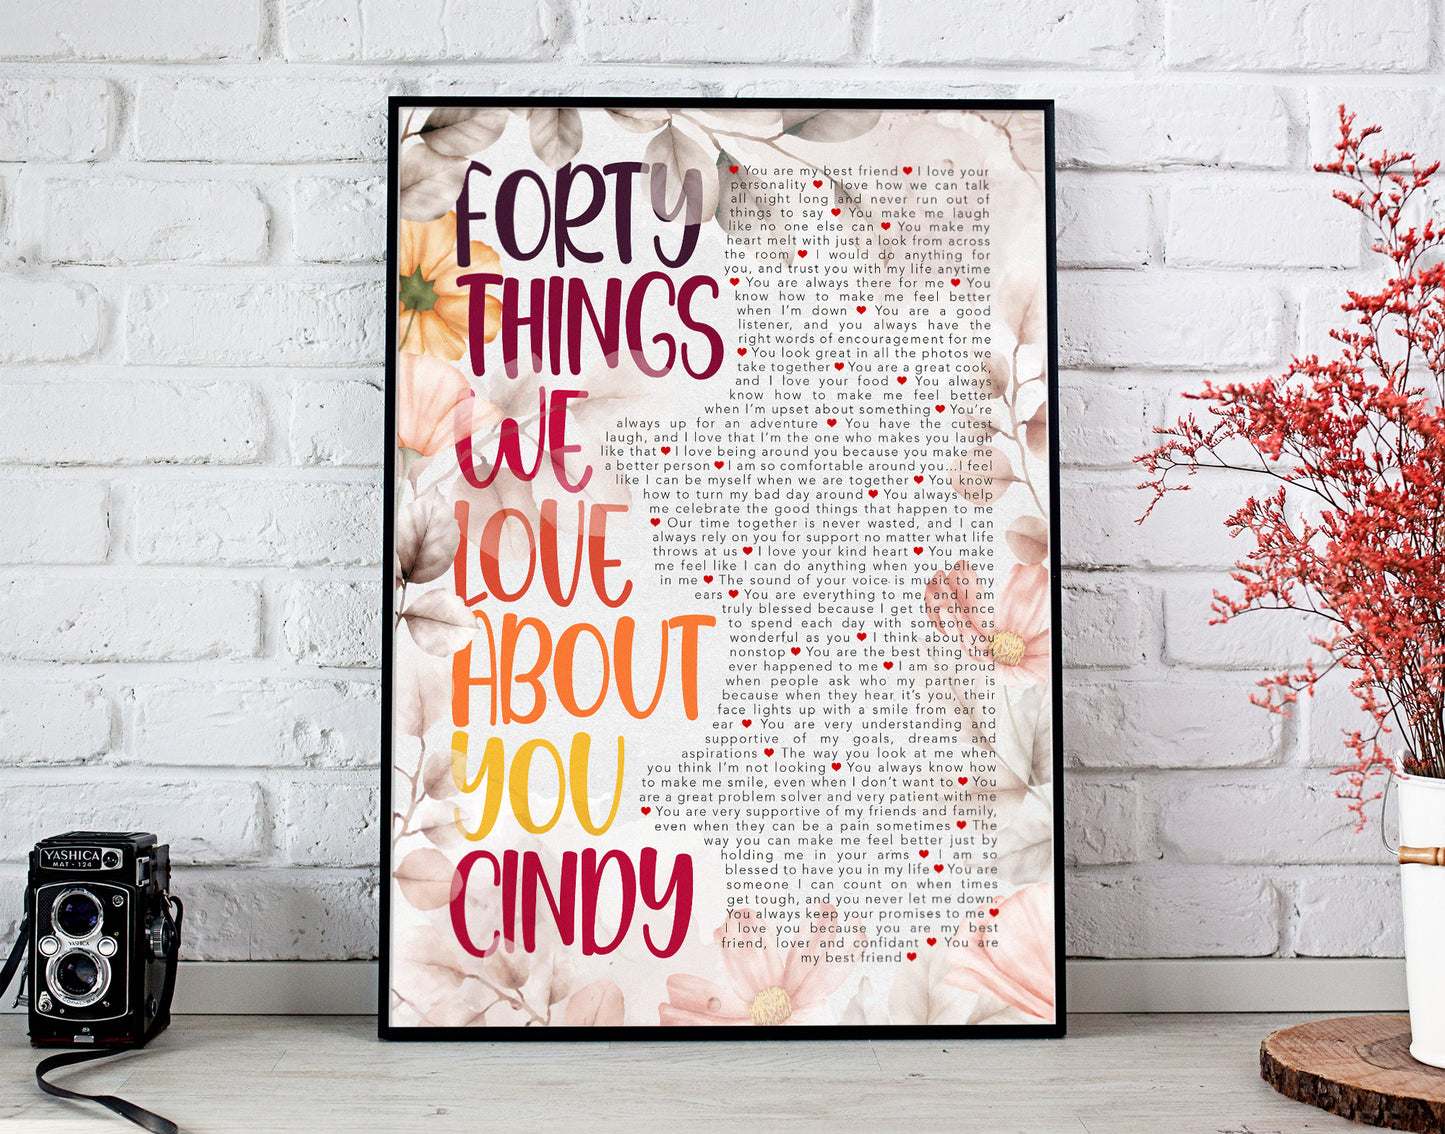 Forty Things We Love About You - 40th Birthday gift - Personalized Name and things -Digital Canvas Print File